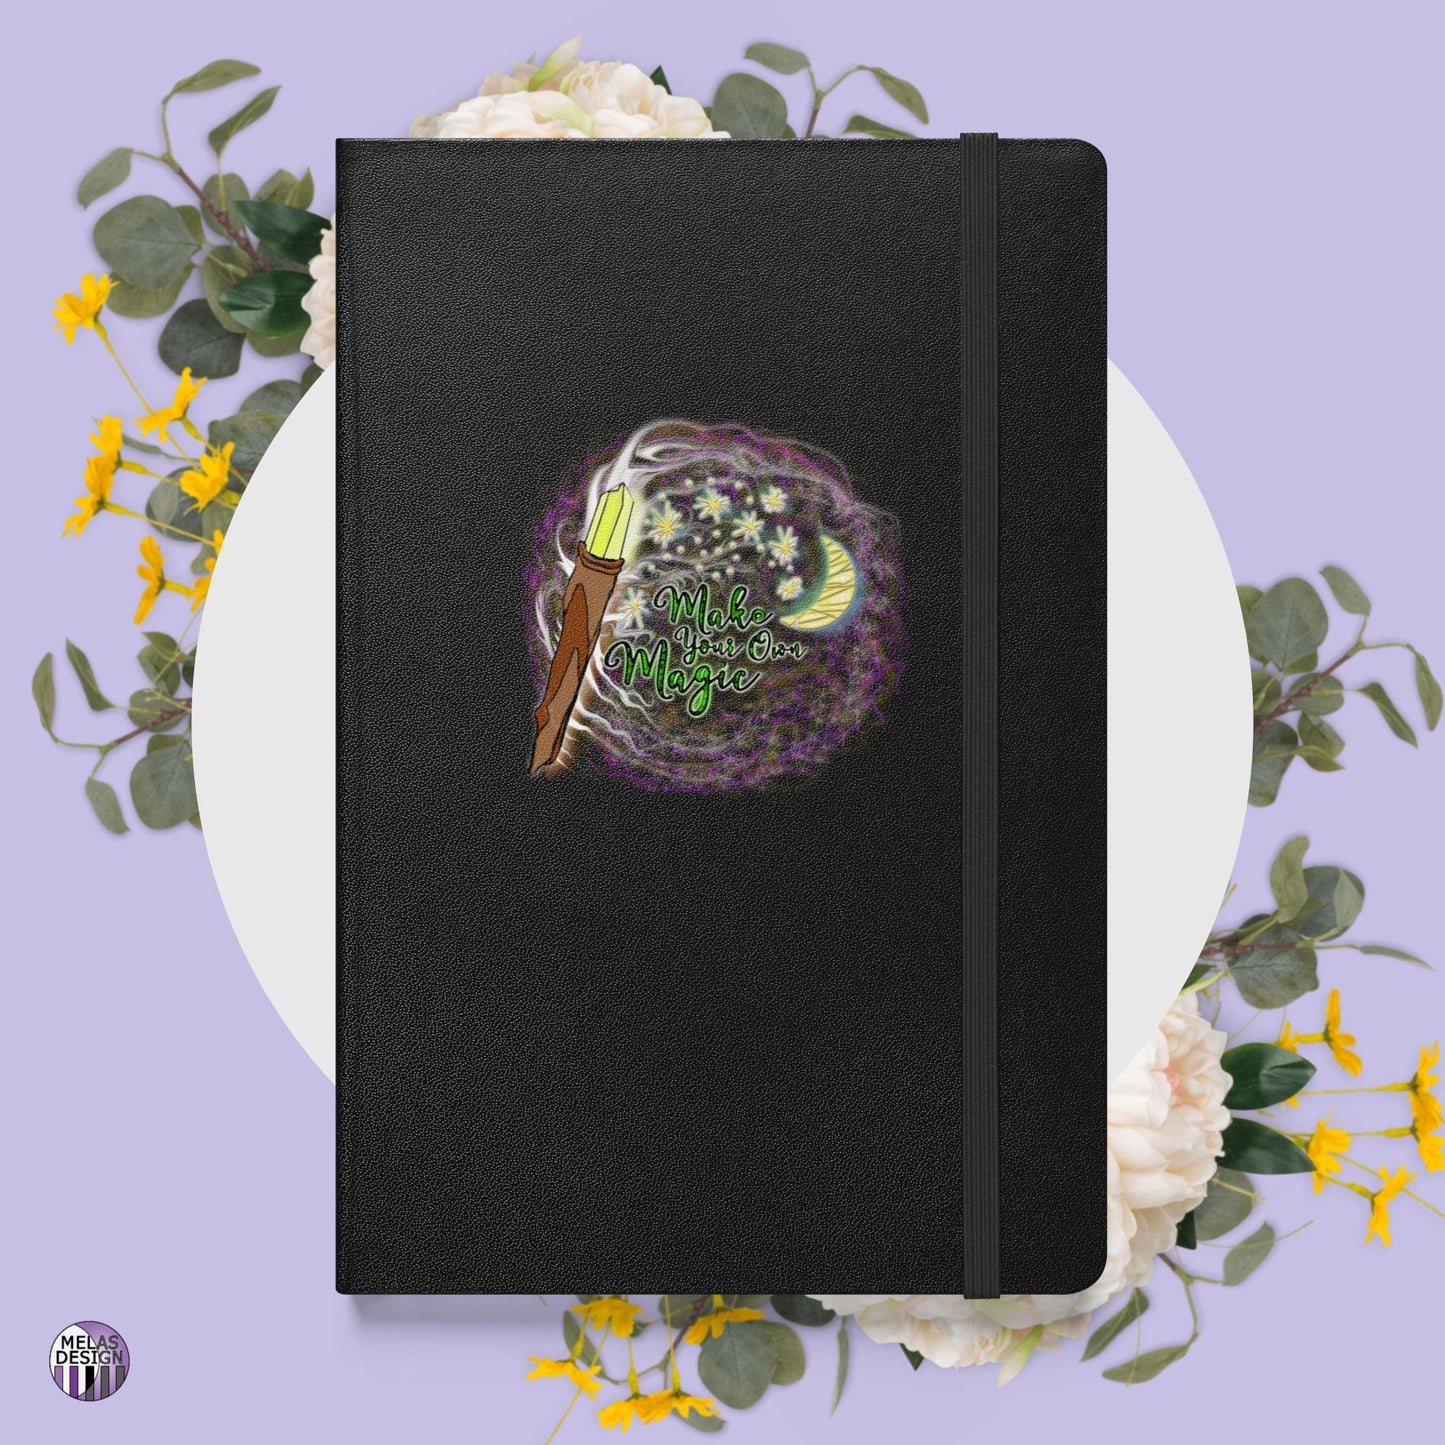 Make Your Own Magic; Grimoire; Book of Shadows;  Notebook; Melasdesign; witchy; Thomas WV; boutique